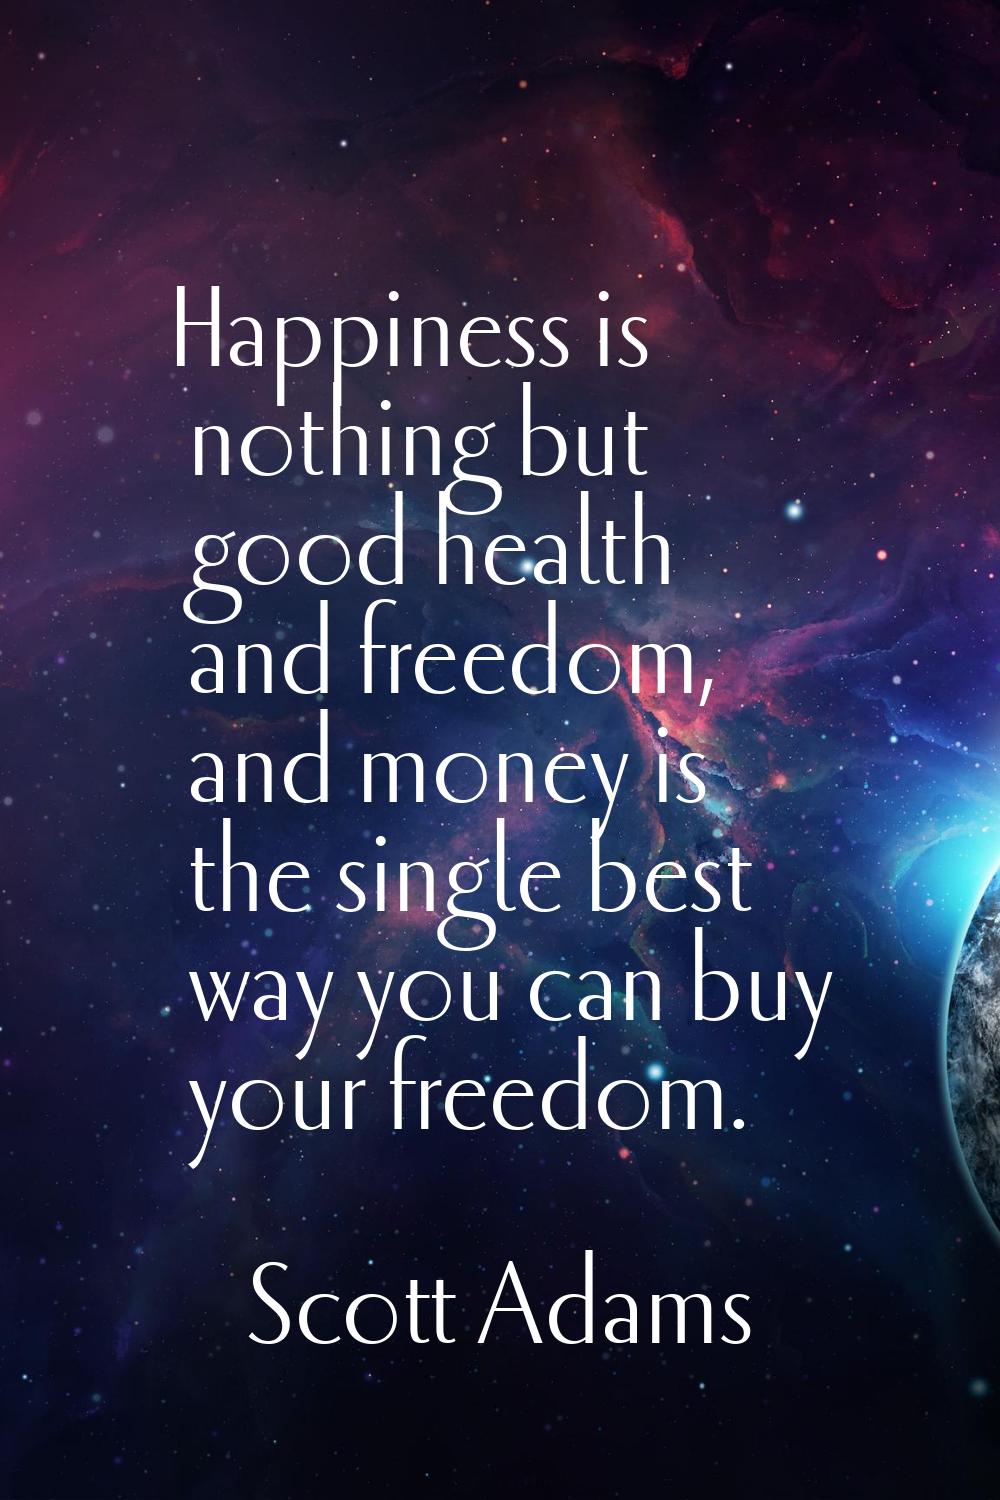 Happiness is nothing but good health and freedom, and money is the single best way you can buy your